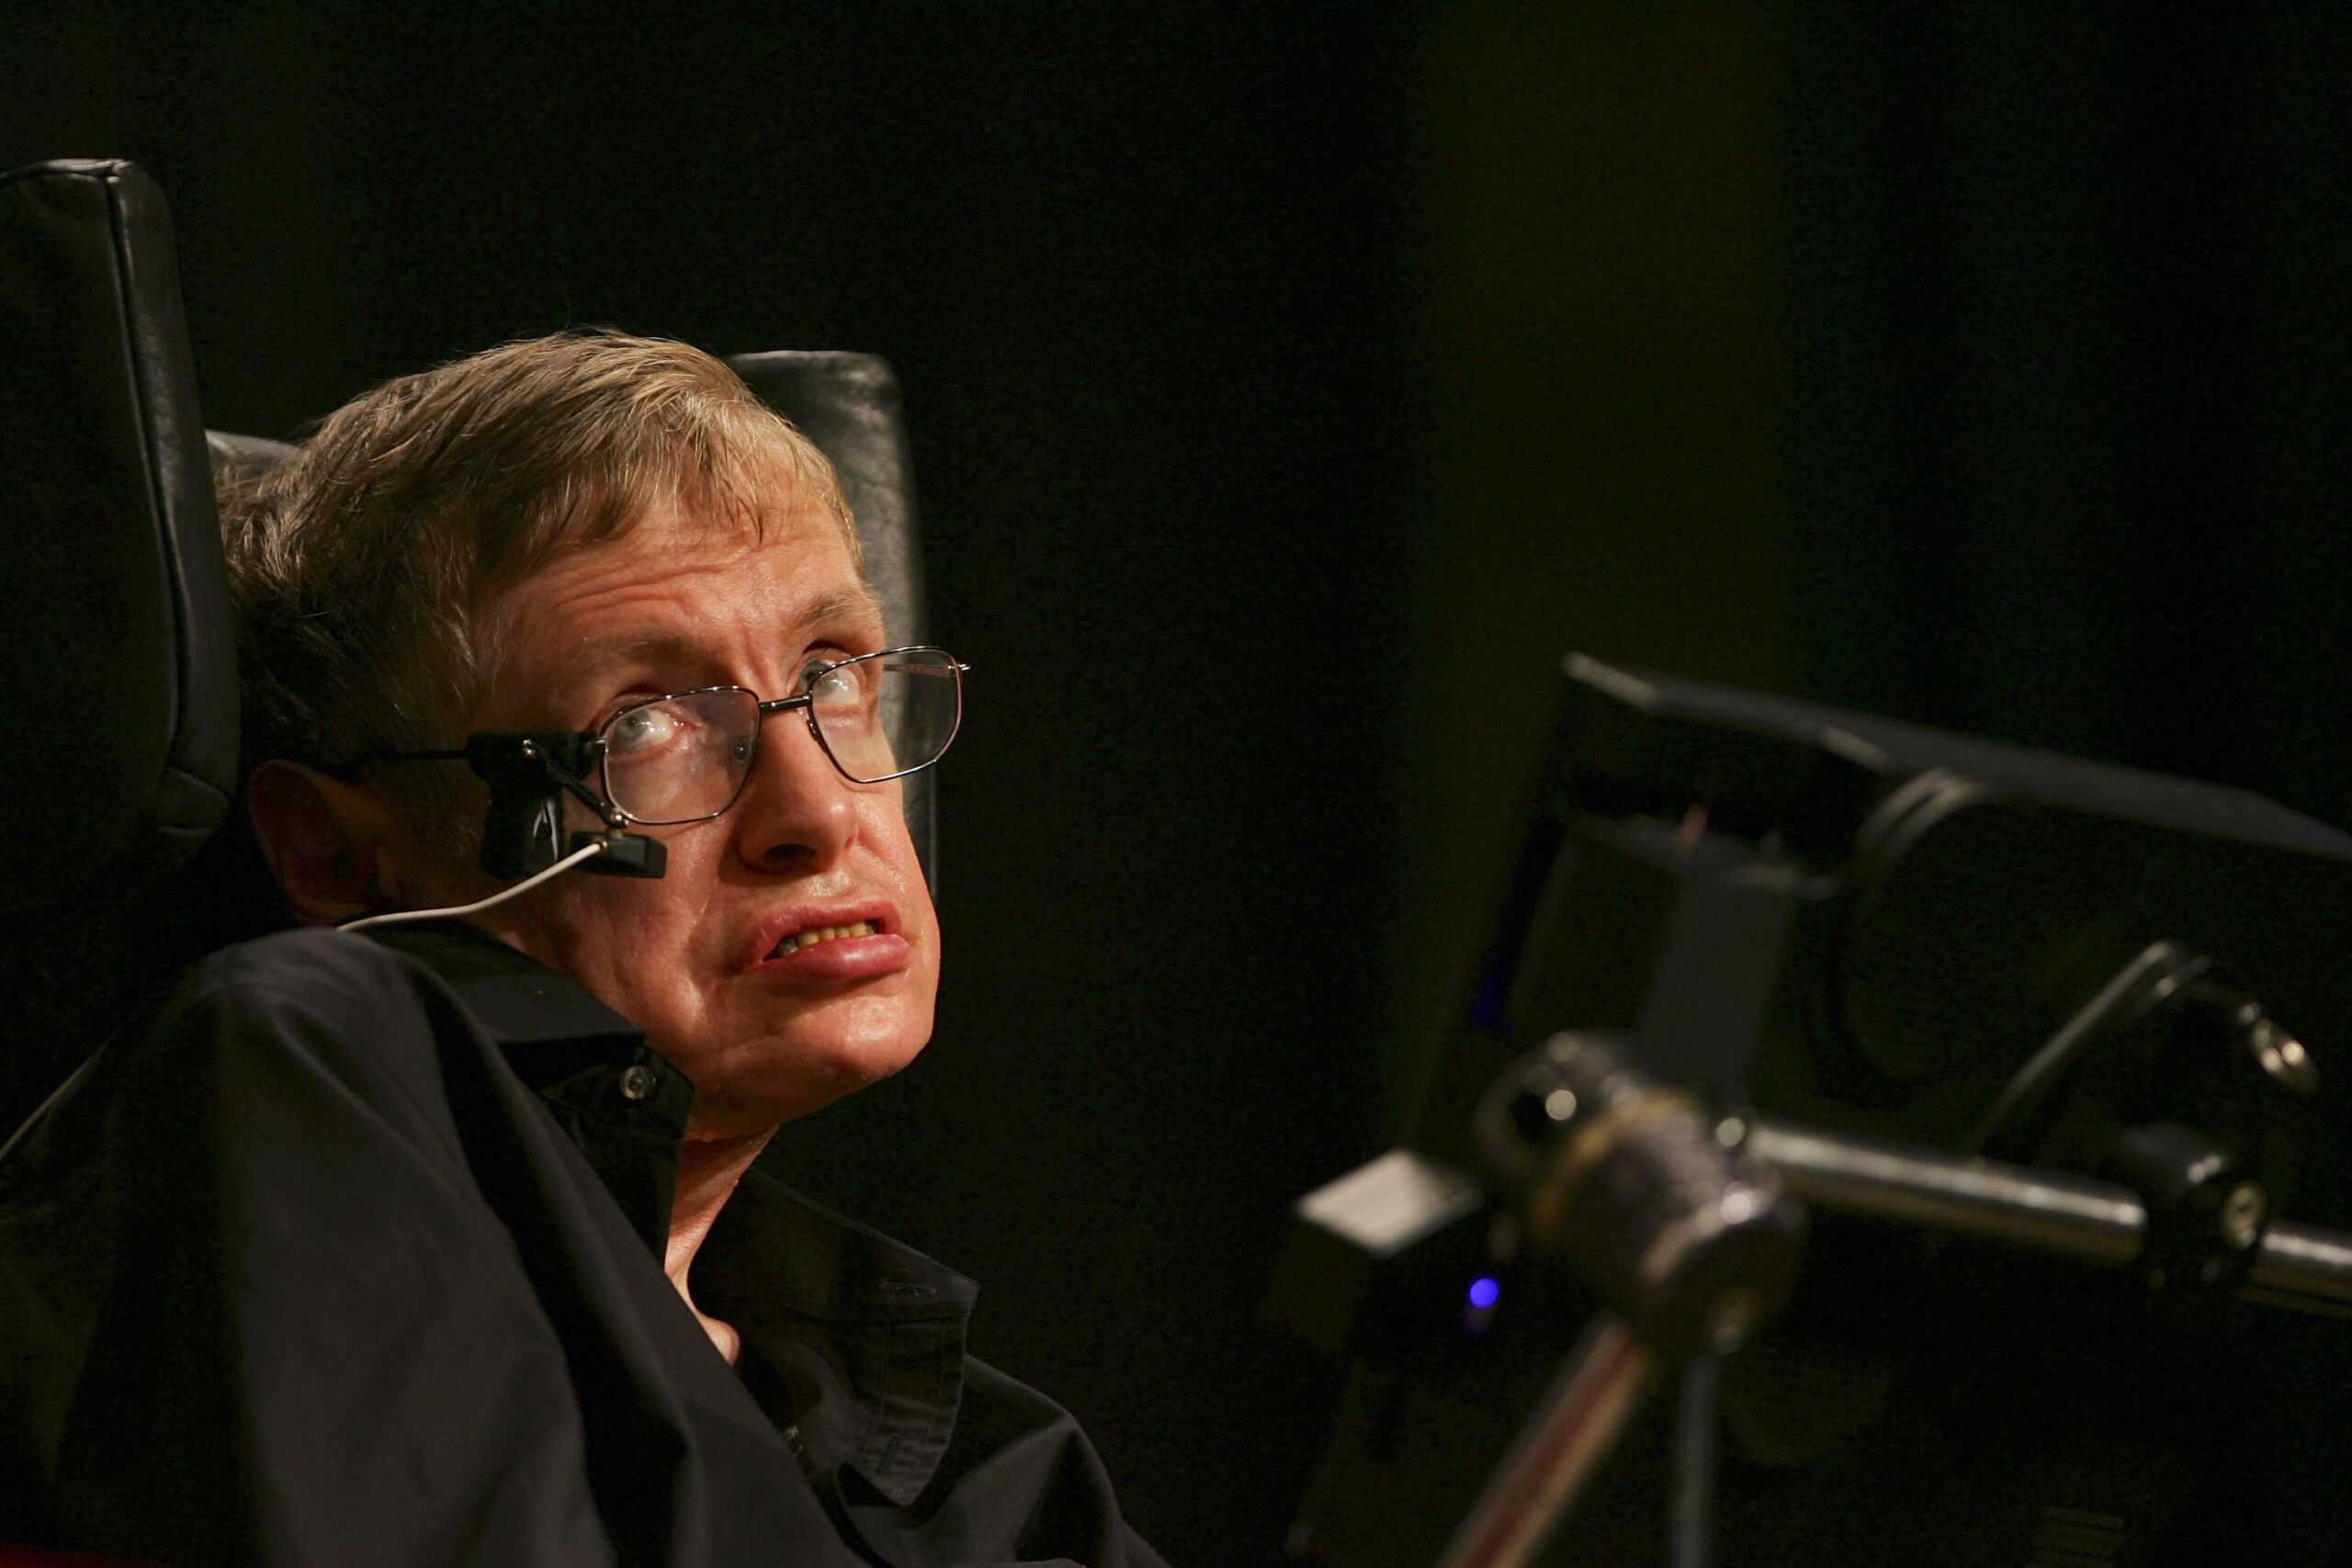 <p>Death waits for no one, and it did eventually take Stephen Hawking at the age of 76. That said, he was prepared and waiting for his time. He once quipped, <strong>“I have lived with the prospect of an early death for the last 49 <a href="https://history-computer.com/biggest-elon-musk-controversies-of-the-last-year/?utm_campaign=msn&utm_source=msn_slideshow&utm_content=542575&utm_medium=in_content" rel="noopener">years.</a> I’m not afraid of death, but I’m in no hurry to die. I have so much I want to do first.”</strong></p><p><span>Would you please let us know what you think about our content? <p>Agree? Tell us by clicking the “Thumbs Up” button above.</p> Disagree? Leave a comment telling us what you’d change.</span></p>